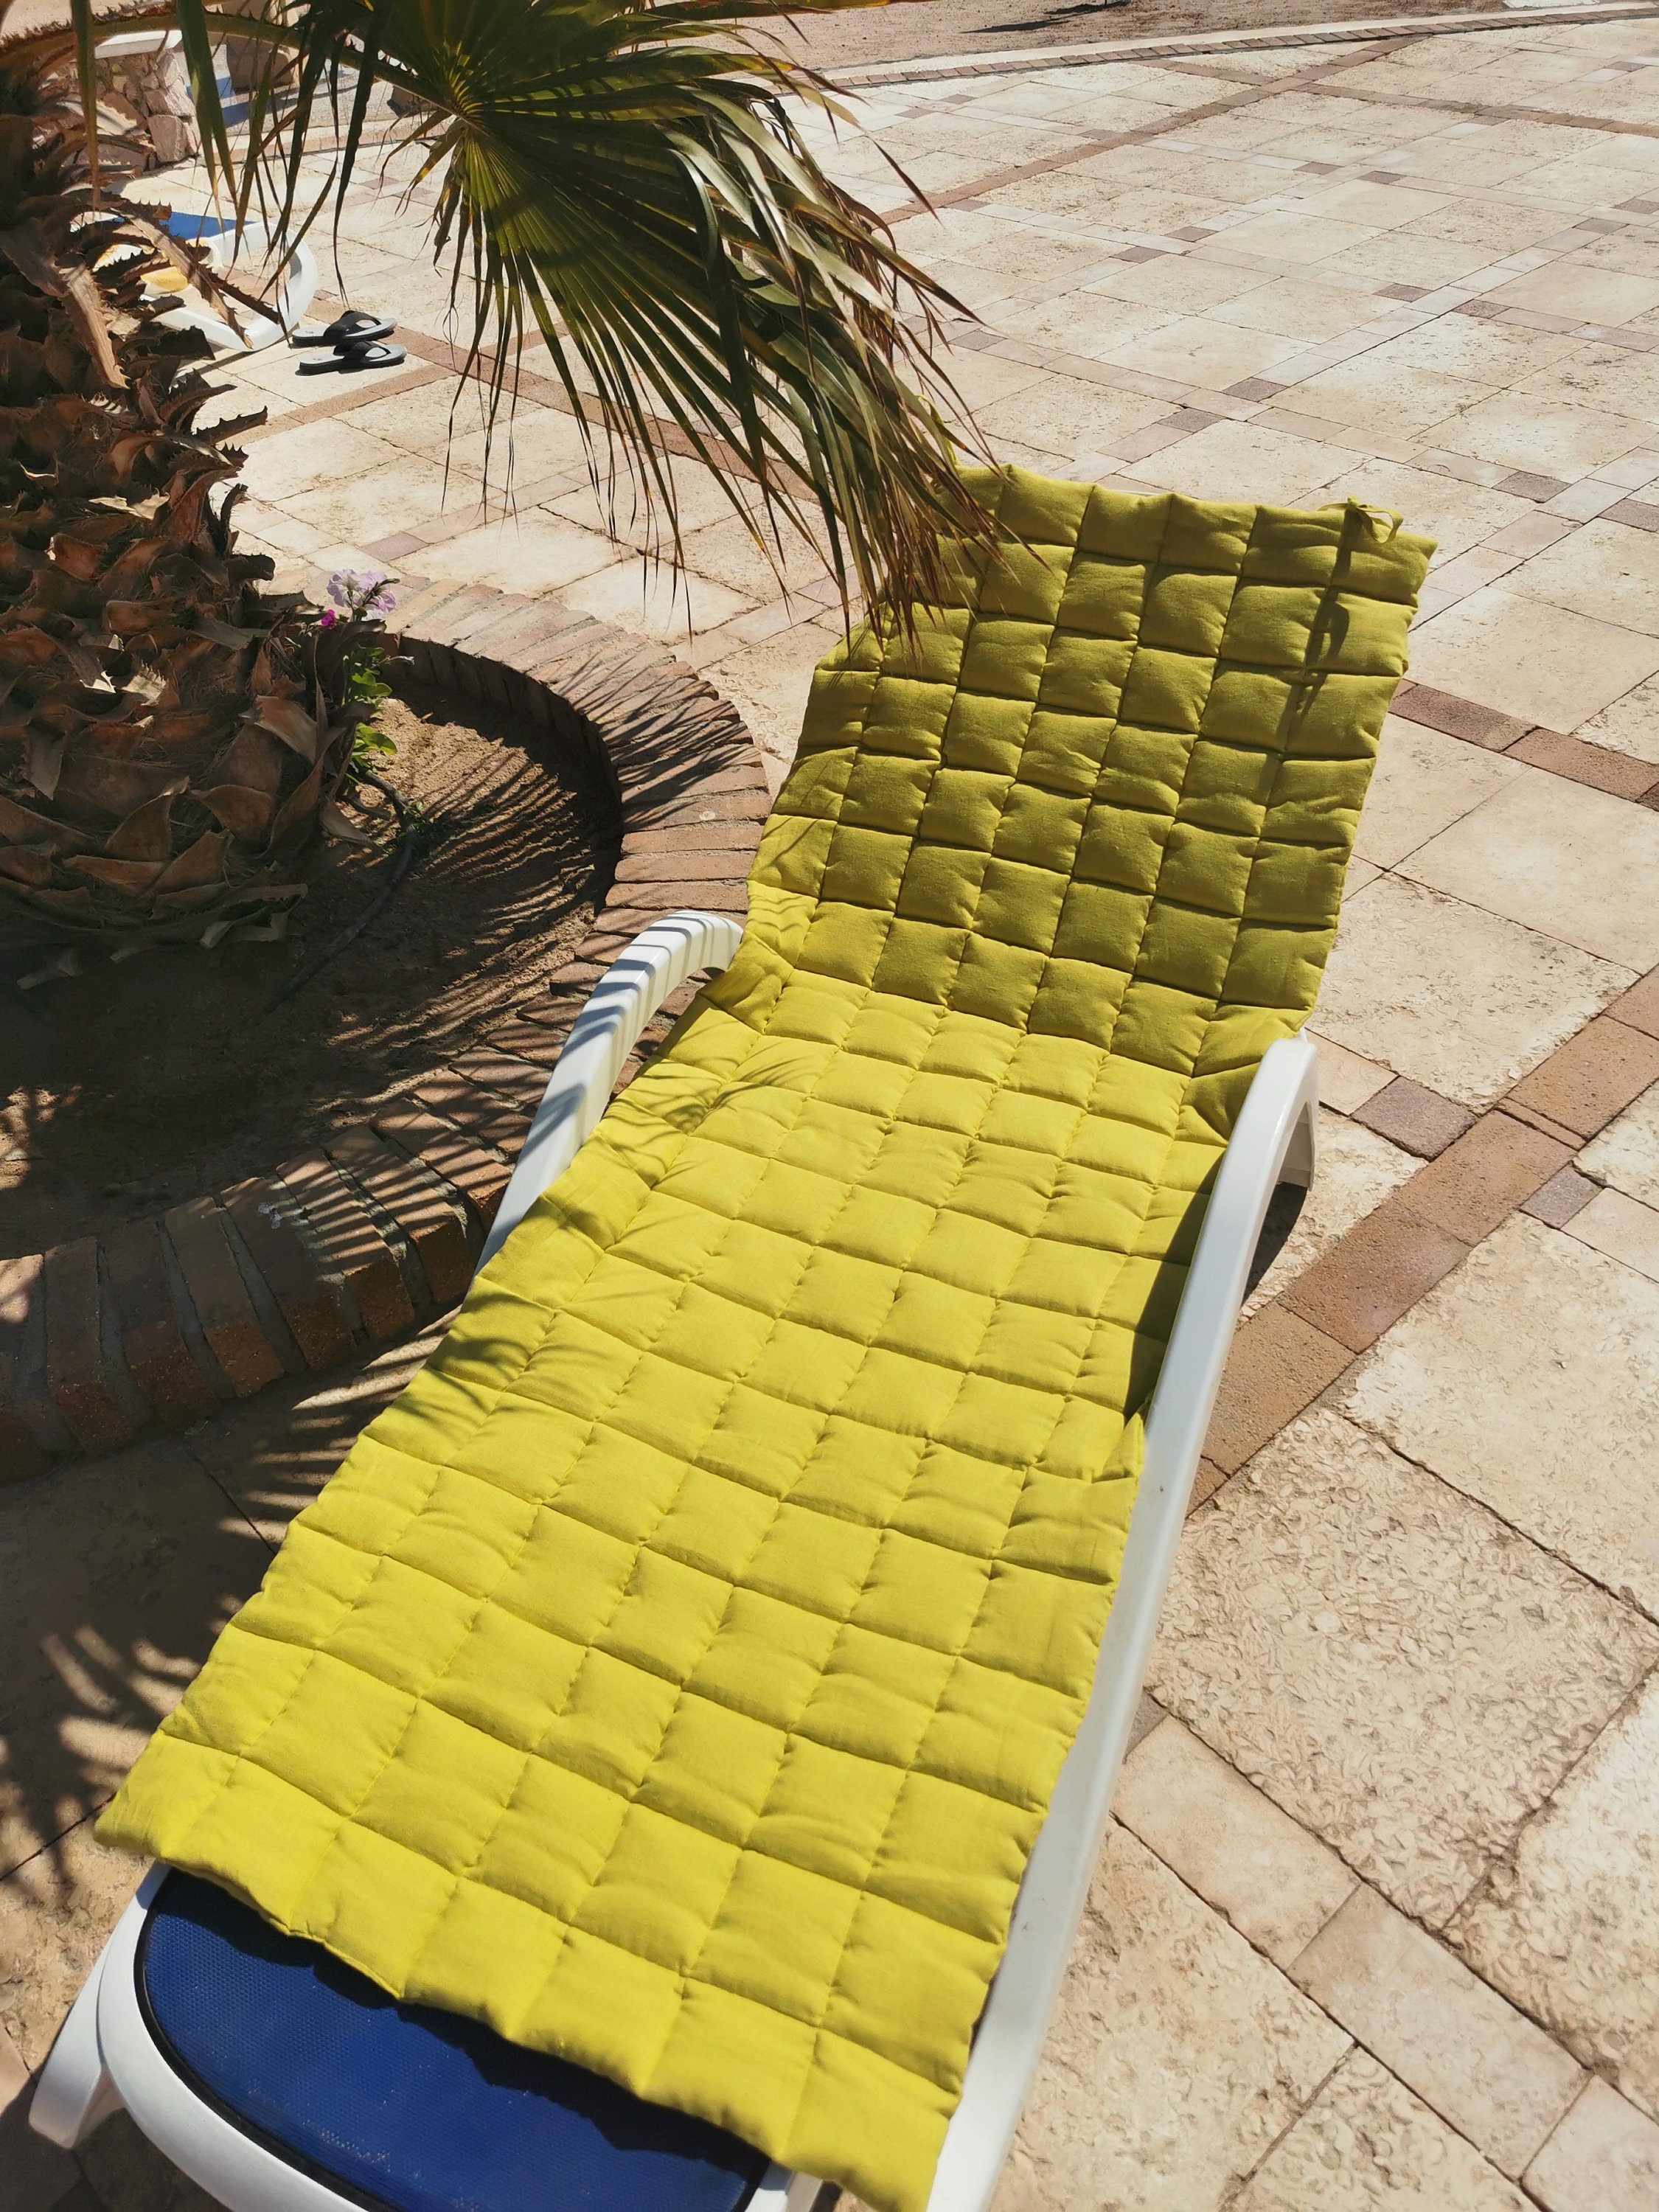 Sun Lounger Chair Cushions, Sunlight Patio Cushions Chaise Outdoor Mattress  Recliner Quilted Thick Padded Seat Cushion Reclining Chair Rocking